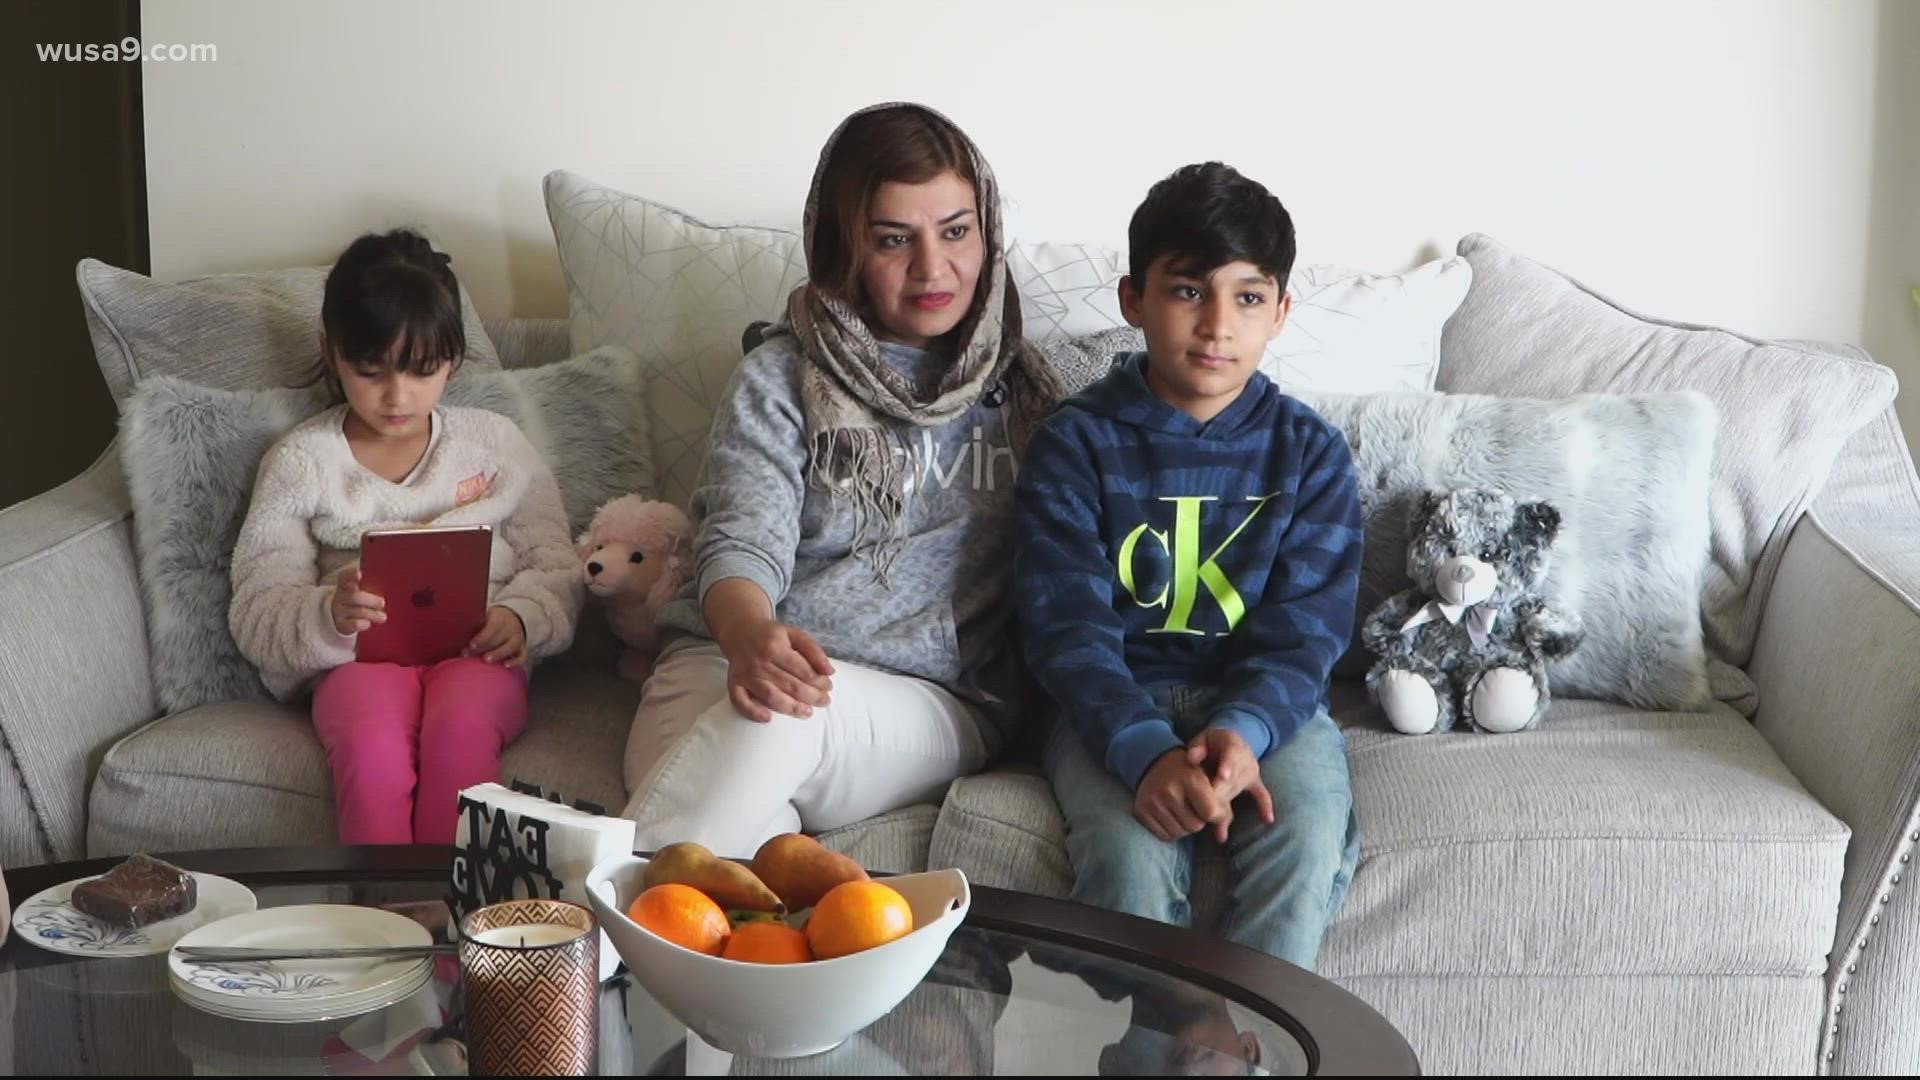 8-year-old Mina and 13-year-old Faisal survived the bomb in Afghanistan that killed their mother.